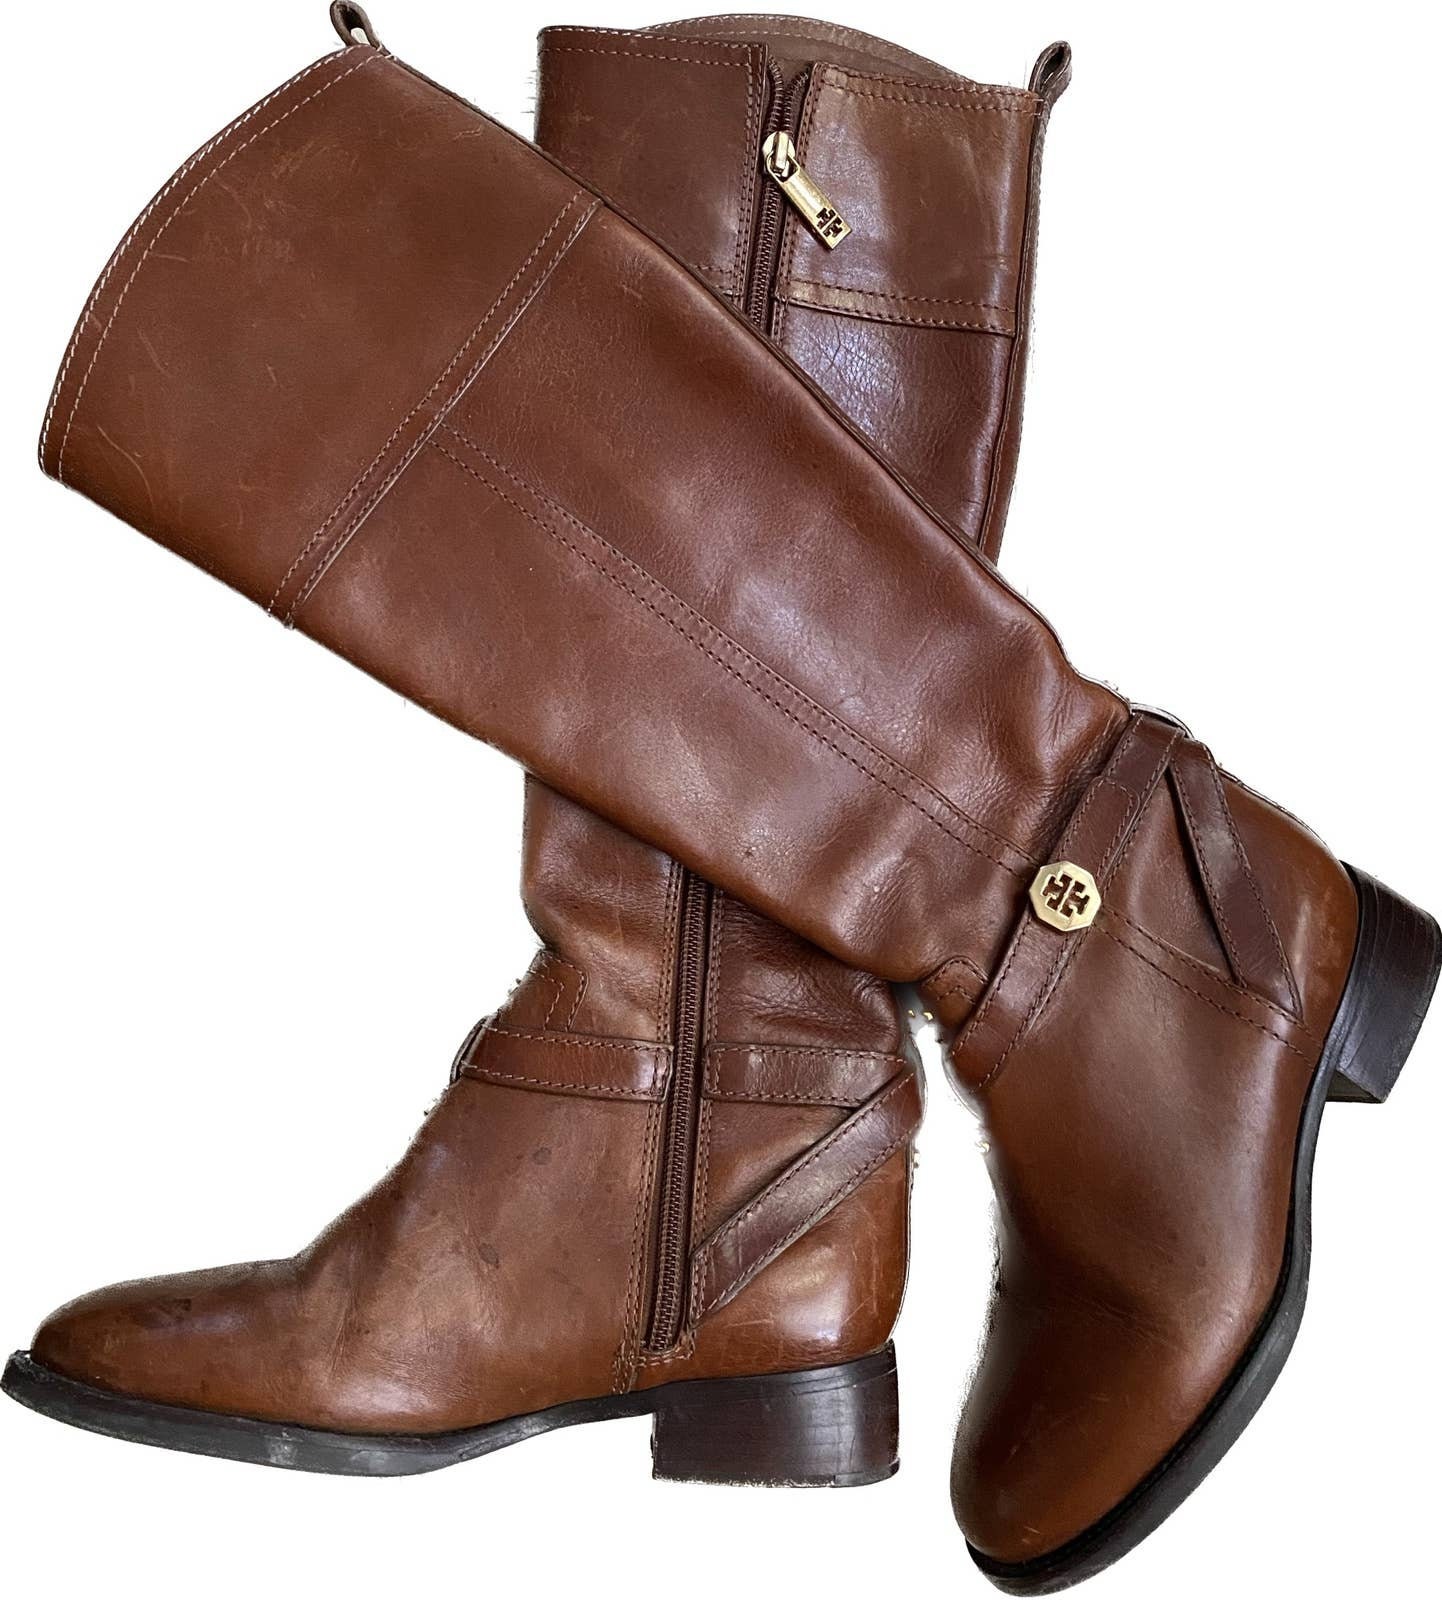 Chanel Brown Leather Low Heel Tall Boots SIZE 38.5